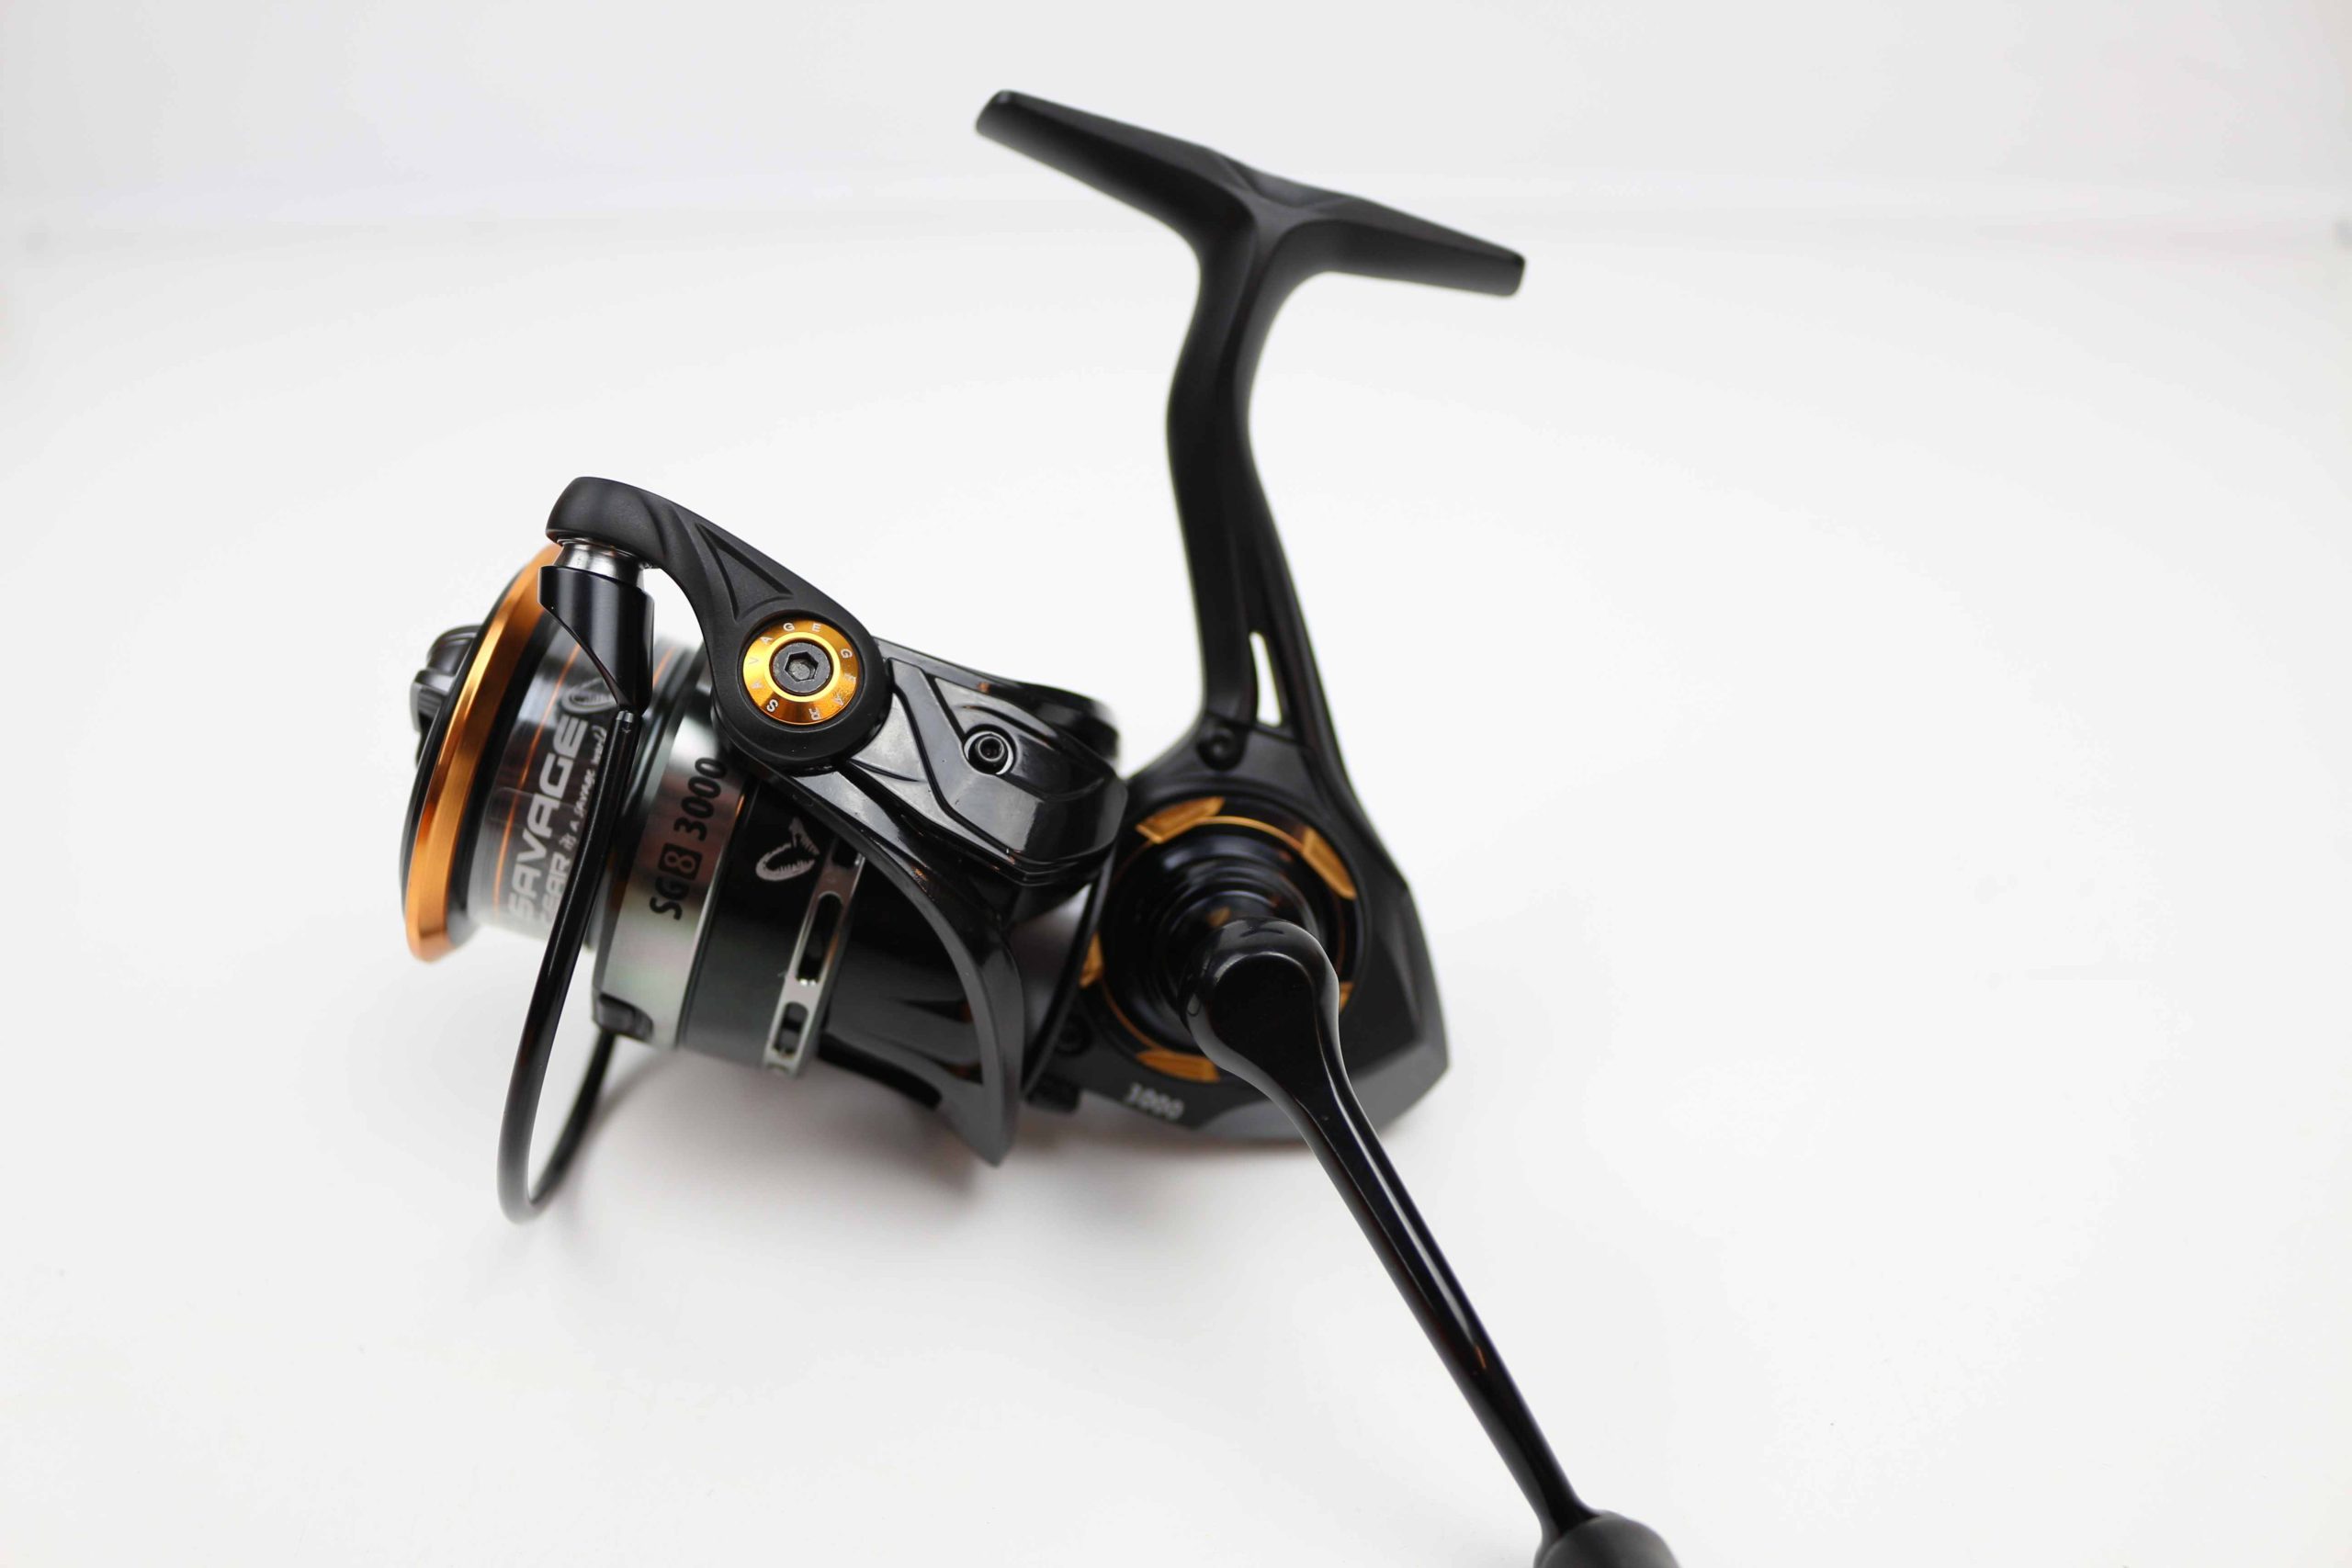 Savage Gear SG8 FD Freshwater Spinning Reel: 4000 - Tackle Up